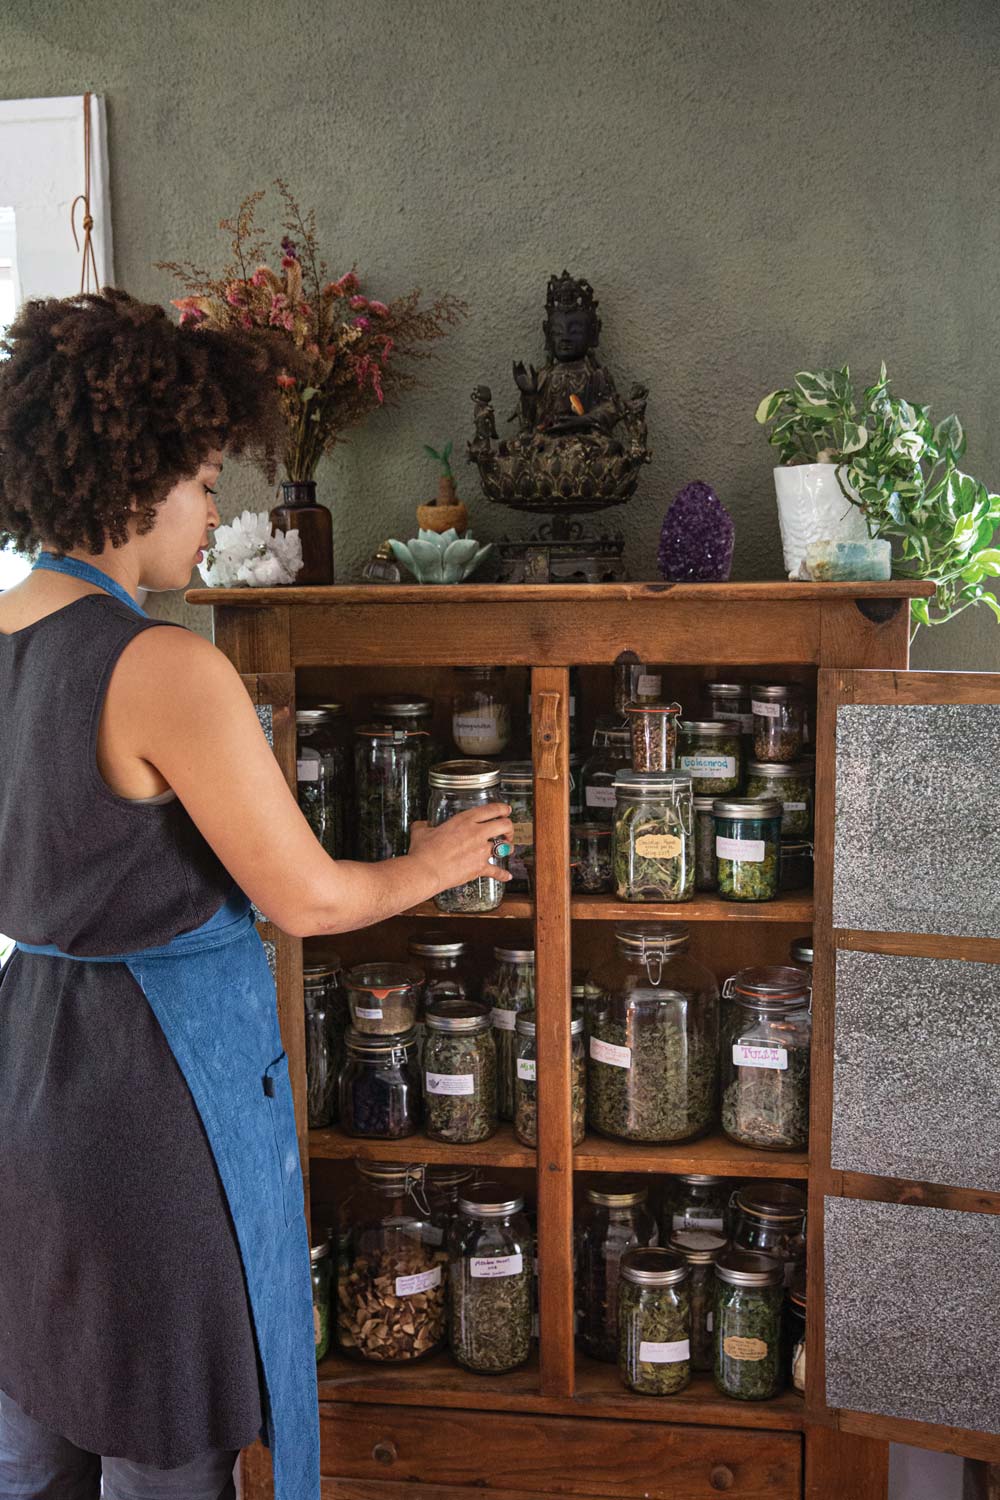 Storing dried herbs in a dark cabinet extends their shelf life.